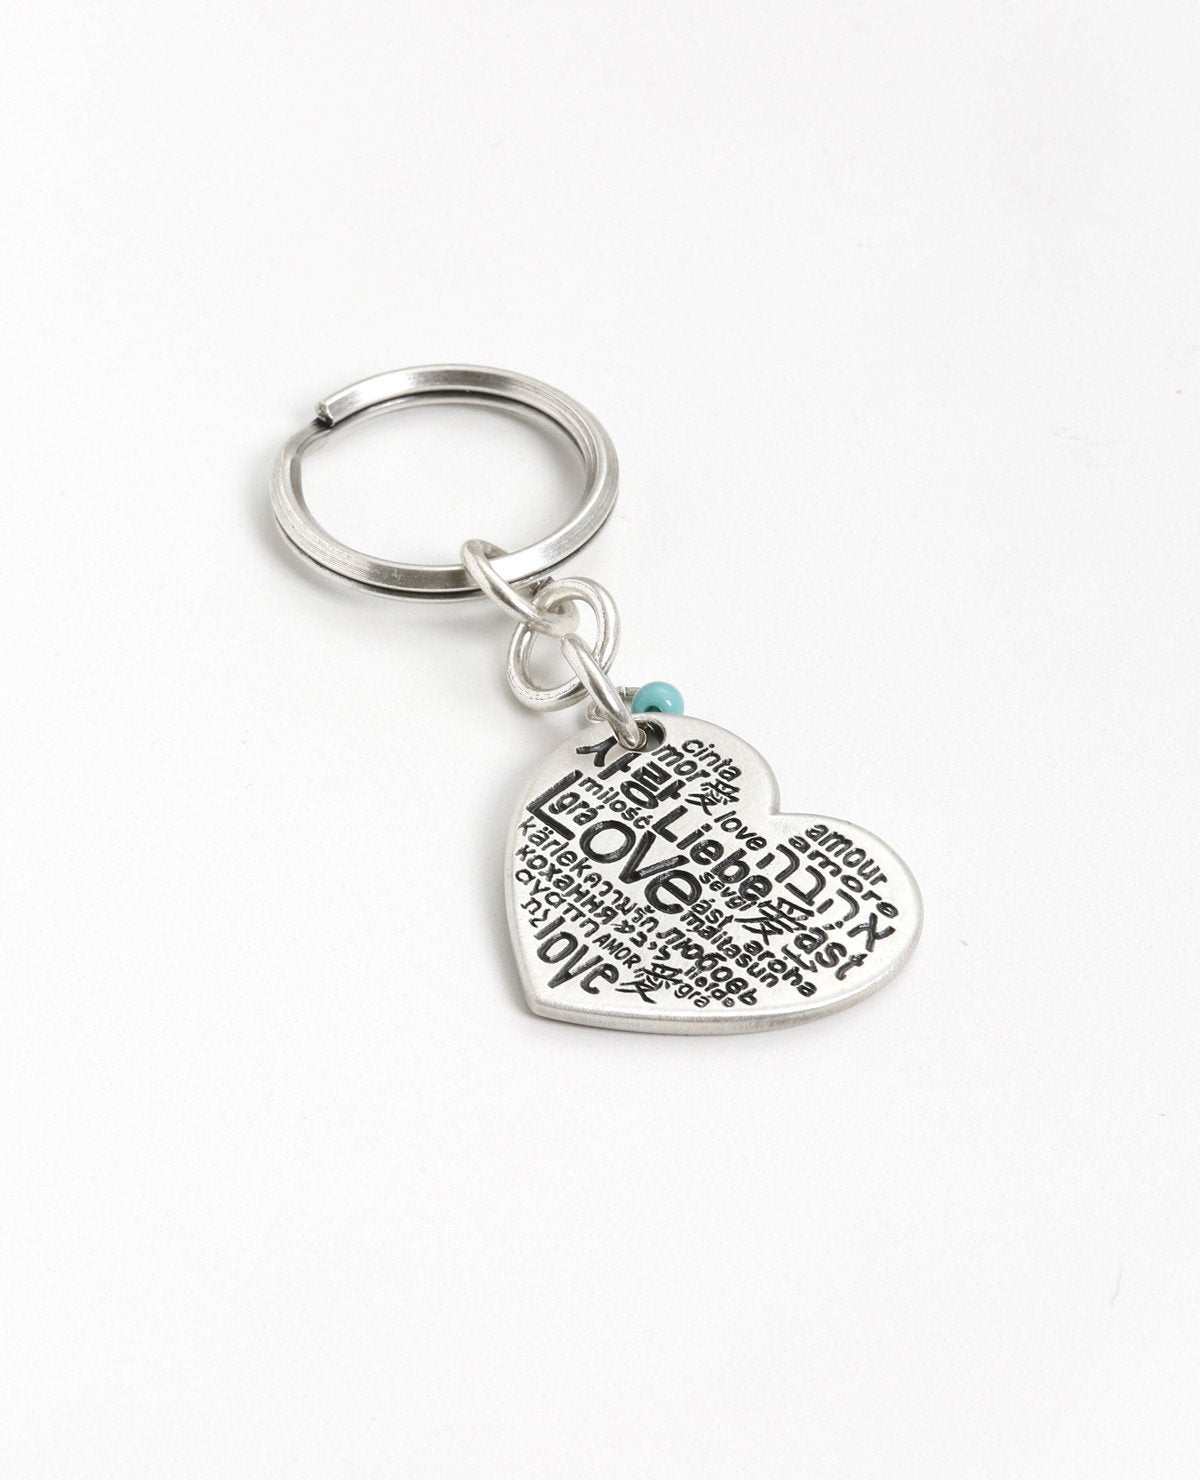 As romantic as it gets! For him and for her. A charming keychain in the shape of a decorated heart with the words "I love you just the way you are" written on one side. On the other side the word "Love" is written in different languages. At the top of the heart hangs a small turquoise colored bead. The keychain is coated in sterling silver and is strong and reliable. Can you think of anything more romantic to give to him or her? Is there anything beyond accepting our loved ones exactly as they are? 
Comes a